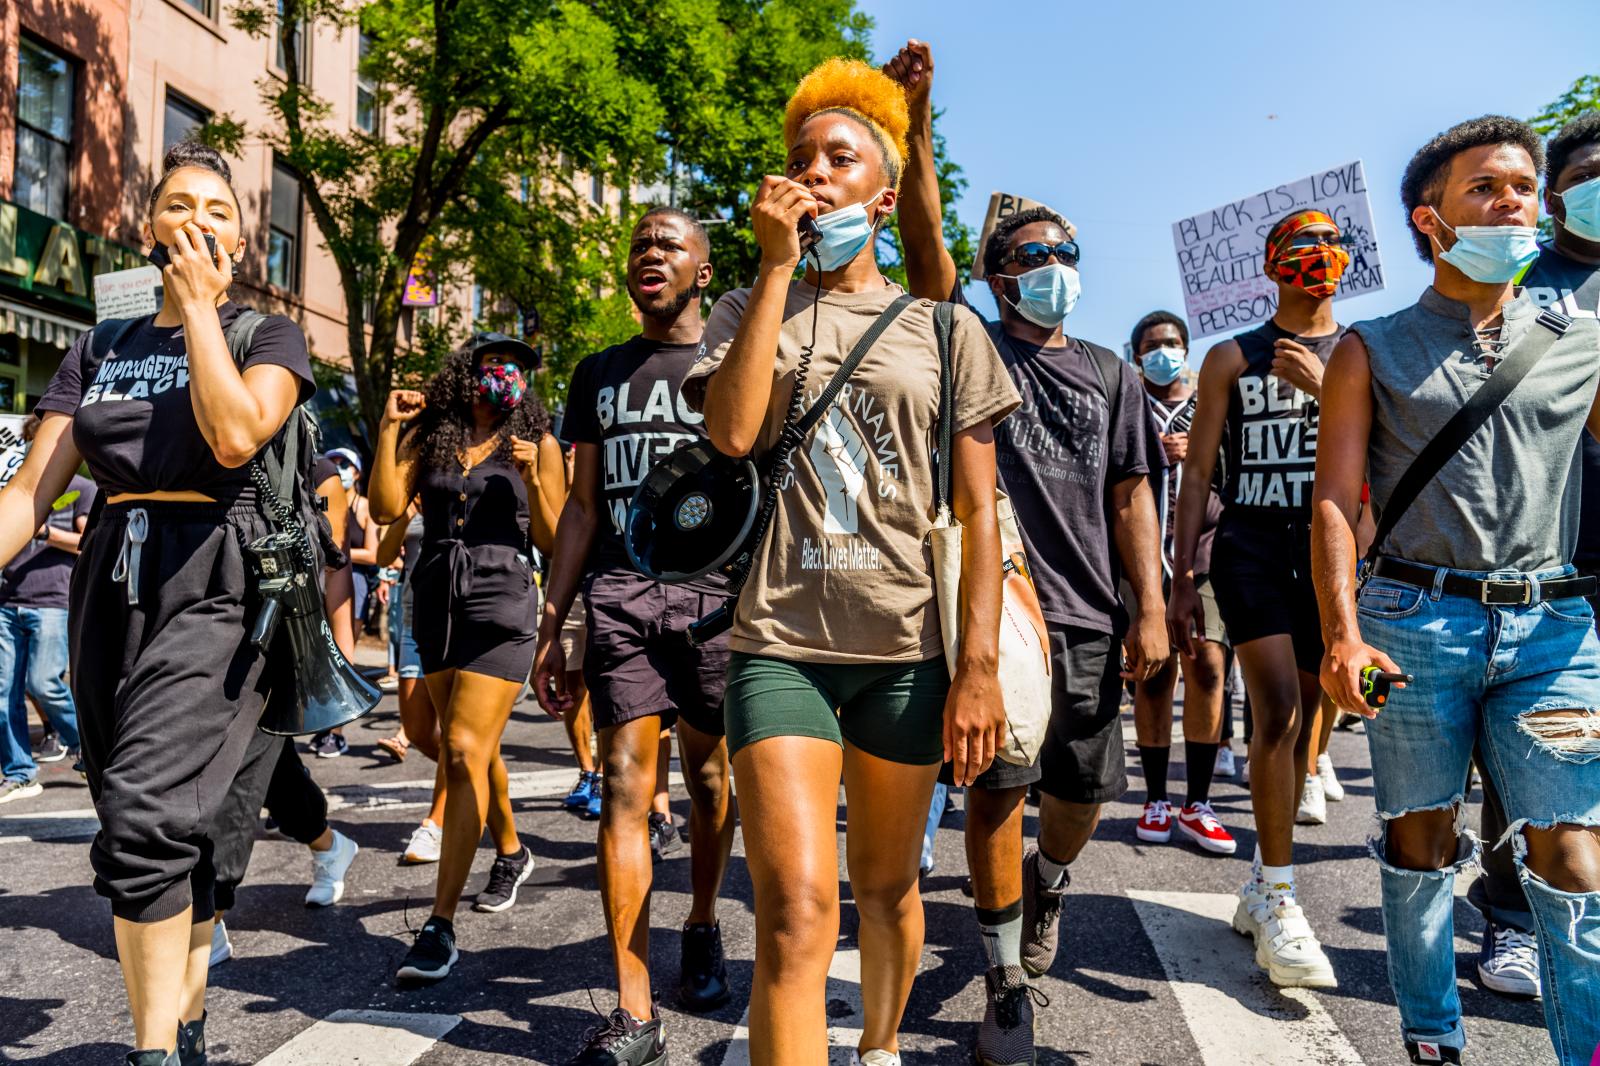 Image from Black Lives Matter -  June 19, 2020  Park Slope, Brooklyn NYC 